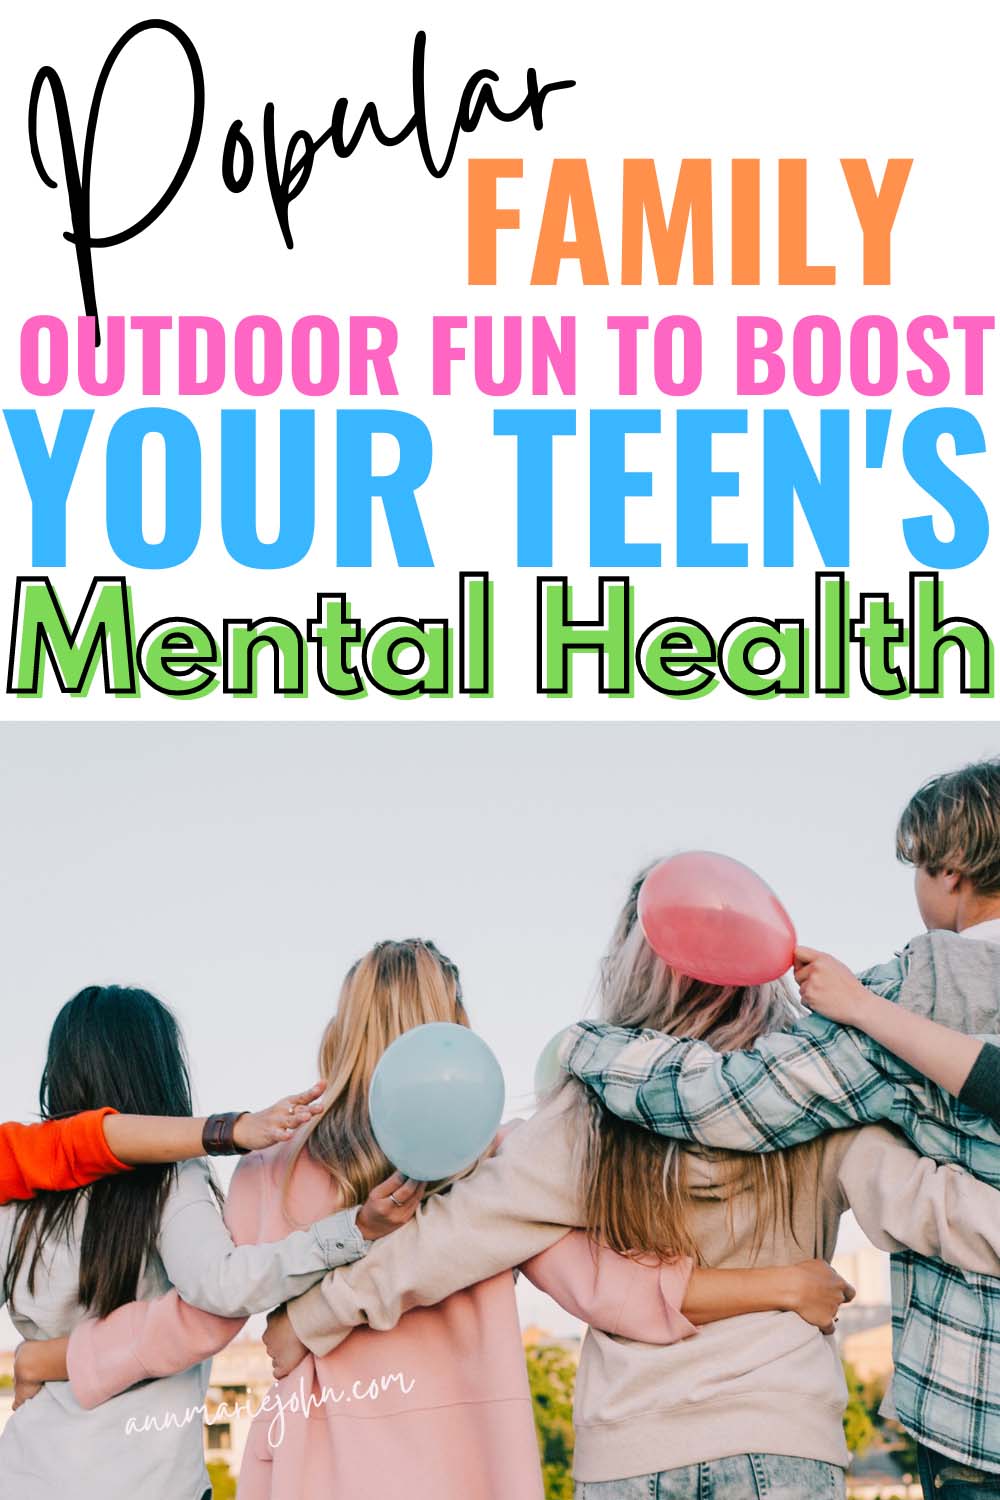 Outdoors Fun to Boost Your Teens' Mental Health